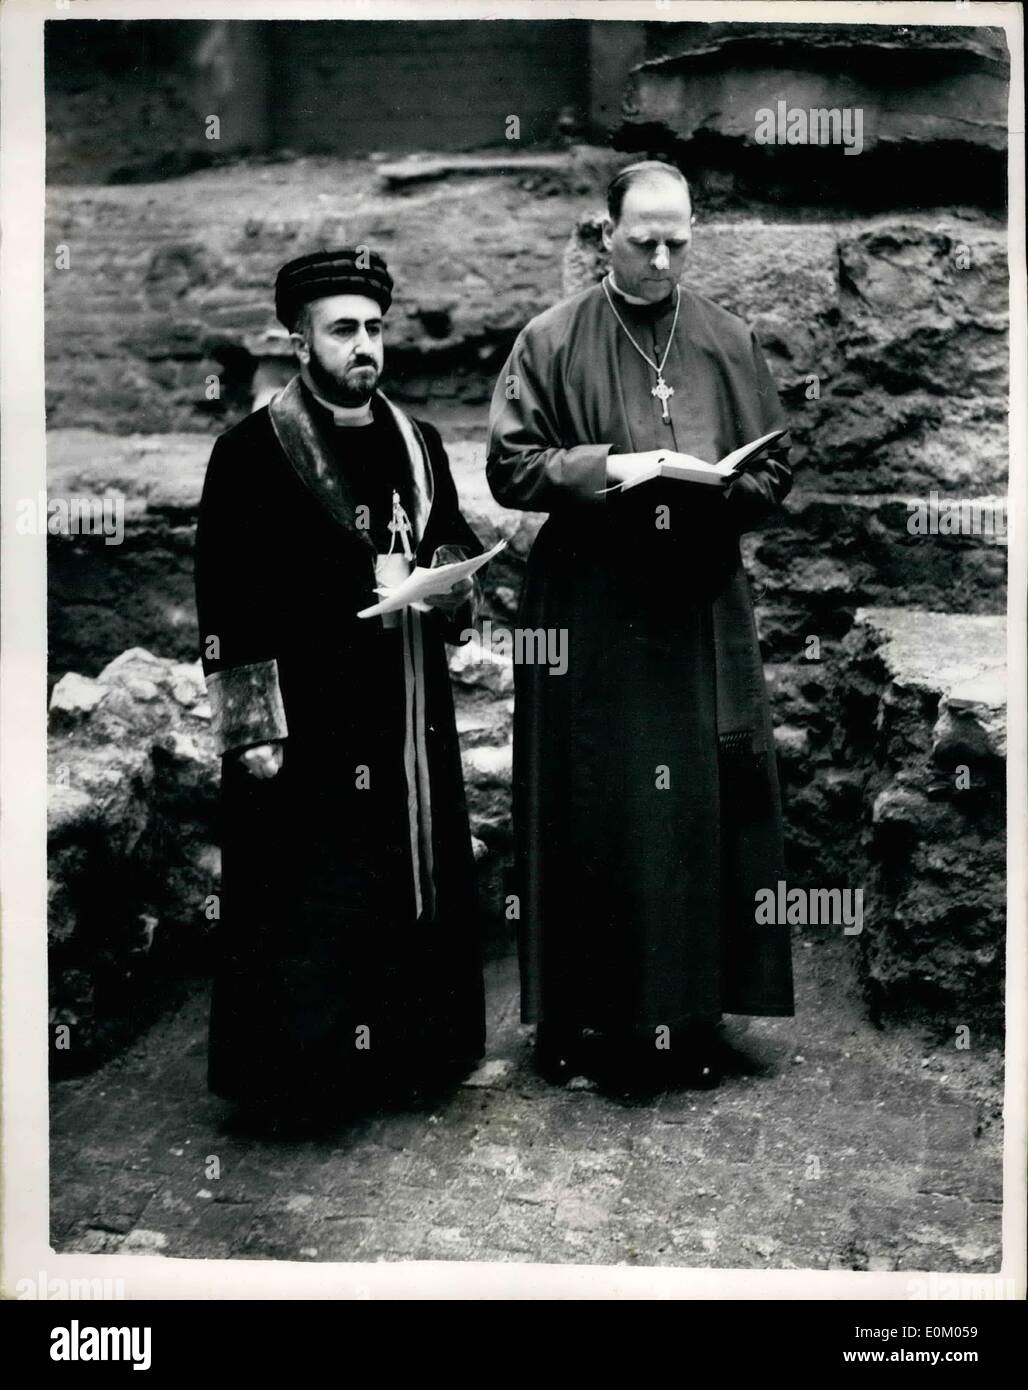 Feb. 02, 1953 - Patrick Visits Ancients Basilica: His Holiness Mrs. Shimun, Christian Dalai Lama of the Assyrian Church, today visited the ancient basilica discovered under the blitzed remains of London's eldest church - St. Bride's Fleet-Street, A short service was conducted in Ayamaic, the language spoken by Christ. The Patriarch is the 119th holder of his office, which is hereditary in his family. He was selected from six boys. all trained from birth - and consecrated at the age of 12. Photo Shows Miss Holiness Mar Shimun conducting the service at St. Bride's today, Stock Photo